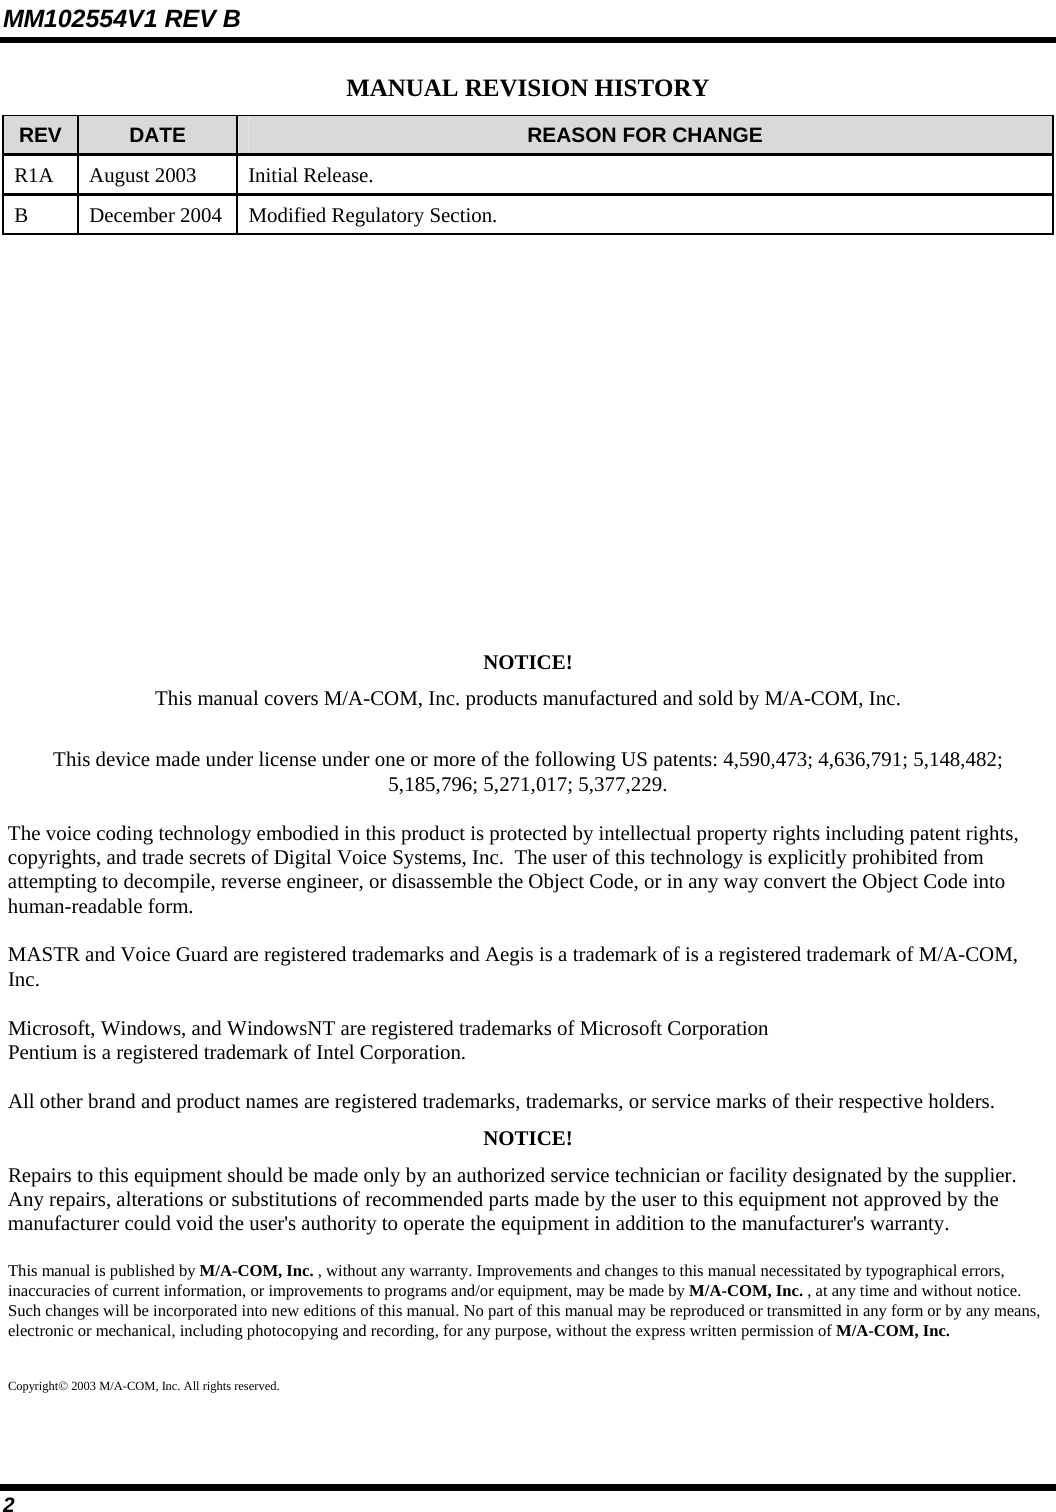 MM102554V1 REV B 2 MANUAL REVISION HISTORY REV  DATE  REASON FOR CHANGE R1A  August 2003  Initial Release.  B December 2004 Modified Regulatory Section.            NOTICE! This manual covers M/A-COM, Inc. products manufactured and sold by M/A-COM, Inc.  This device made under license under one or more of the following US patents: 4,590,473; 4,636,791; 5,148,482; 5,185,796; 5,271,017; 5,377,229.  The voice coding technology embodied in this product is protected by intellectual property rights including patent rights, copyrights, and trade secrets of Digital Voice Systems, Inc.  The user of this technology is explicitly prohibited from attempting to decompile, reverse engineer, or disassemble the Object Code, or in any way convert the Object Code into human-readable form.   MASTR and Voice Guard are registered trademarks and Aegis is a trademark of is a registered trademark of M/A-COM, Inc.  Microsoft, Windows, and WindowsNT are registered trademarks of Microsoft Corporation Pentium is a registered trademark of Intel Corporation.  All other brand and product names are registered trademarks, trademarks, or service marks of their respective holders. NOTICE! Repairs to this equipment should be made only by an authorized service technician or facility designated by the supplier. Any repairs, alterations or substitutions of recommended parts made by the user to this equipment not approved by the manufacturer could void the user&apos;s authority to operate the equipment in addition to the manufacturer&apos;s warranty. This manual is published by M/A-COM, Inc. , without any warranty. Improvements and changes to this manual necessitated by typographical errors, inaccuracies of current information, or improvements to programs and/or equipment, may be made by M/A-COM, Inc. , at any time and without notice. Such changes will be incorporated into new editions of this manual. No part of this manual may be reproduced or transmitted in any form or by any means, electronic or mechanical, including photocopying and recording, for any purpose, without the express written permission of M/A-COM, Inc.  Copyright© 2003 M/A-COM, Inc. All rights reserved. 